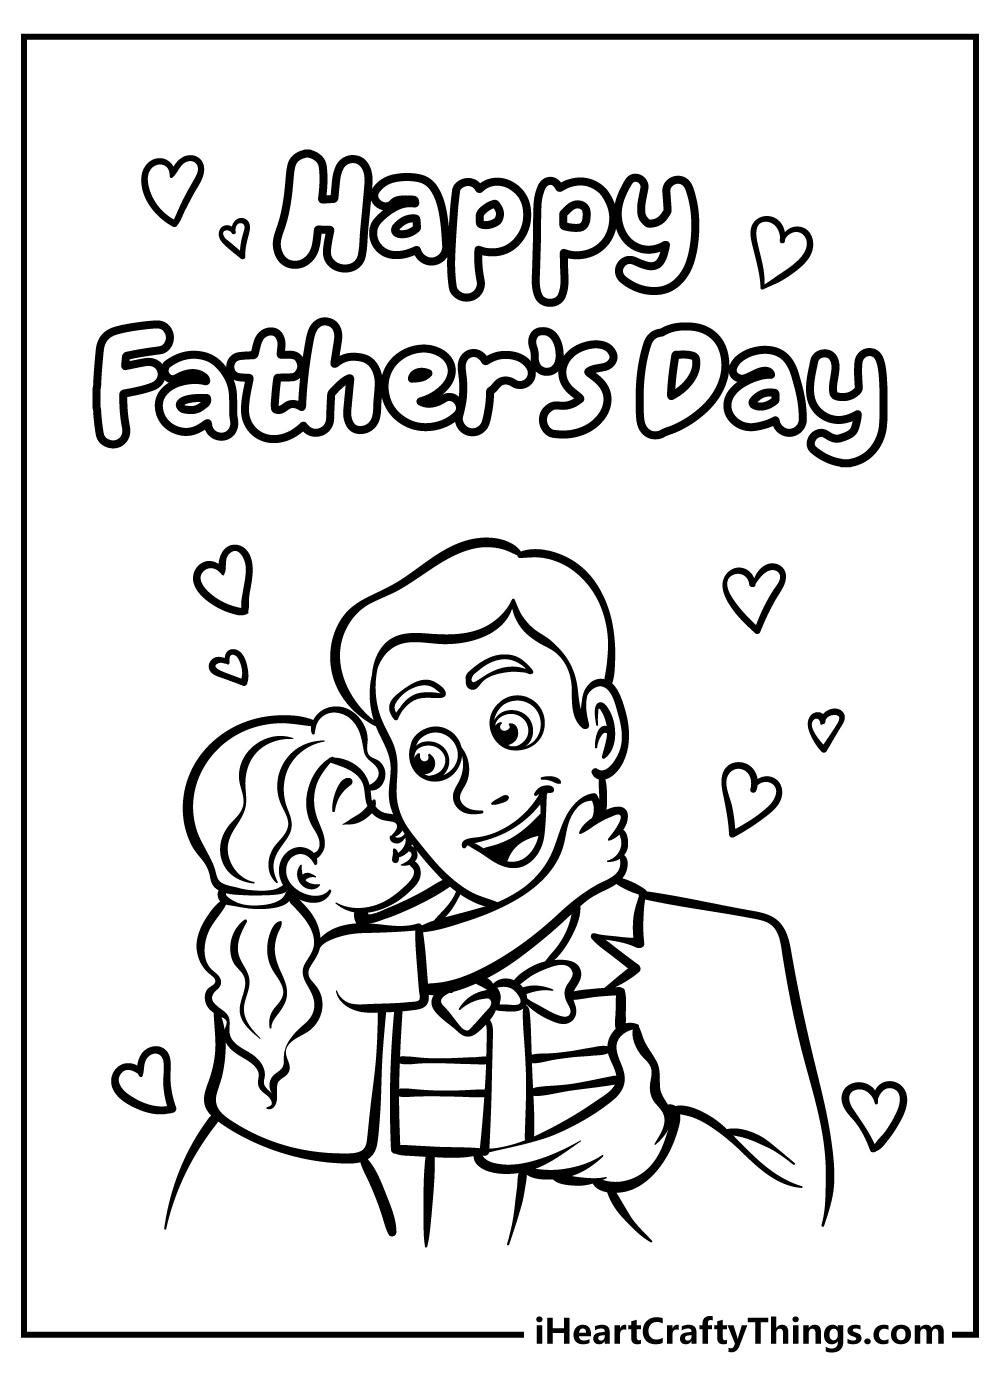 How to draw Father's day drawing cute | Happy Father's day greeting card  drawing - YouTube